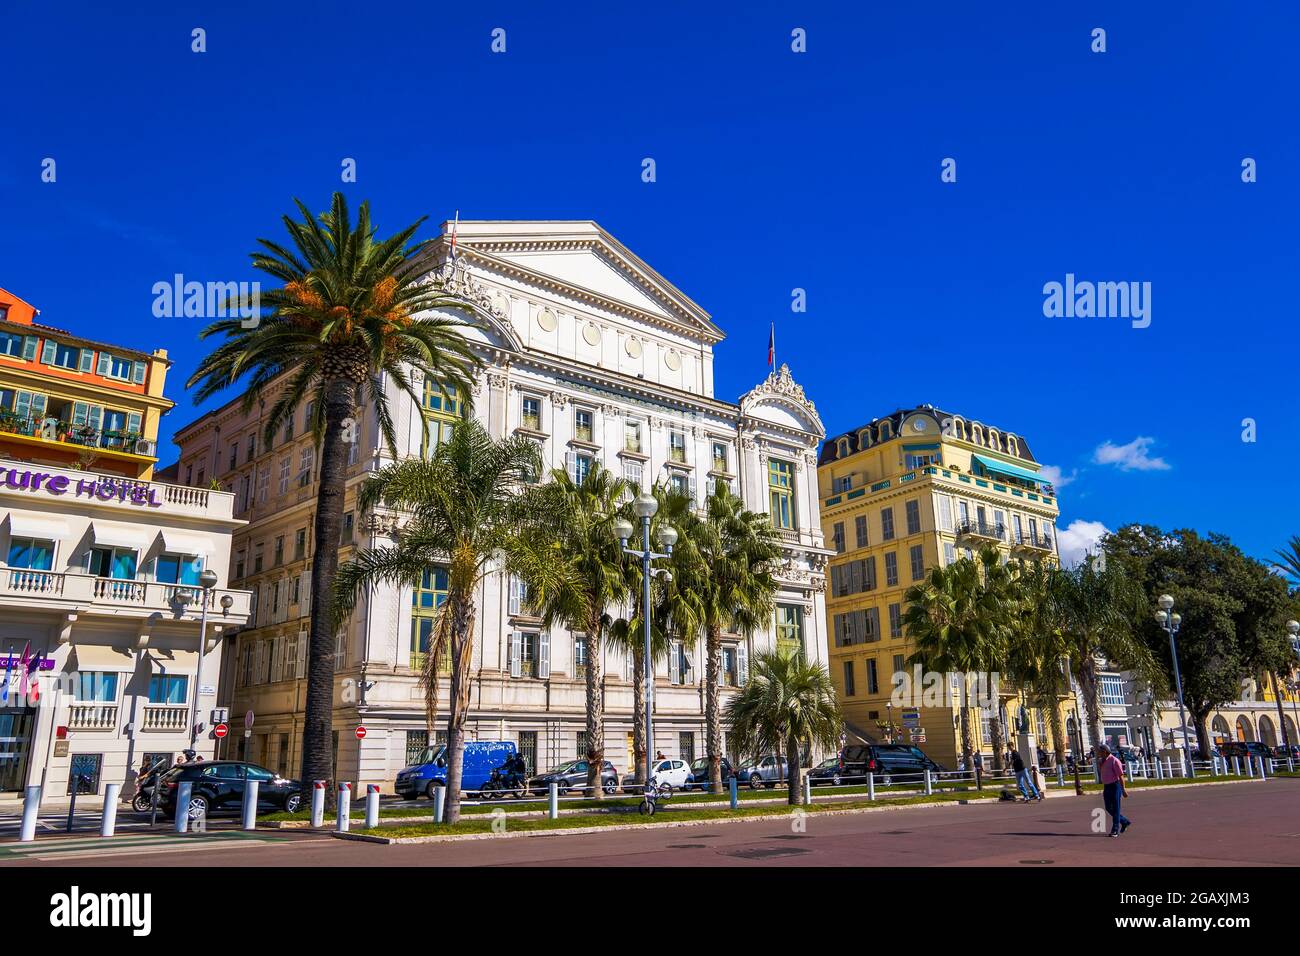 NICE, FRANCE - OCTOBER 6, 2019: Unidentified people by Opera de Nice in France. It is the principal opera venue in Nice, opened at 1885. Stock Photo